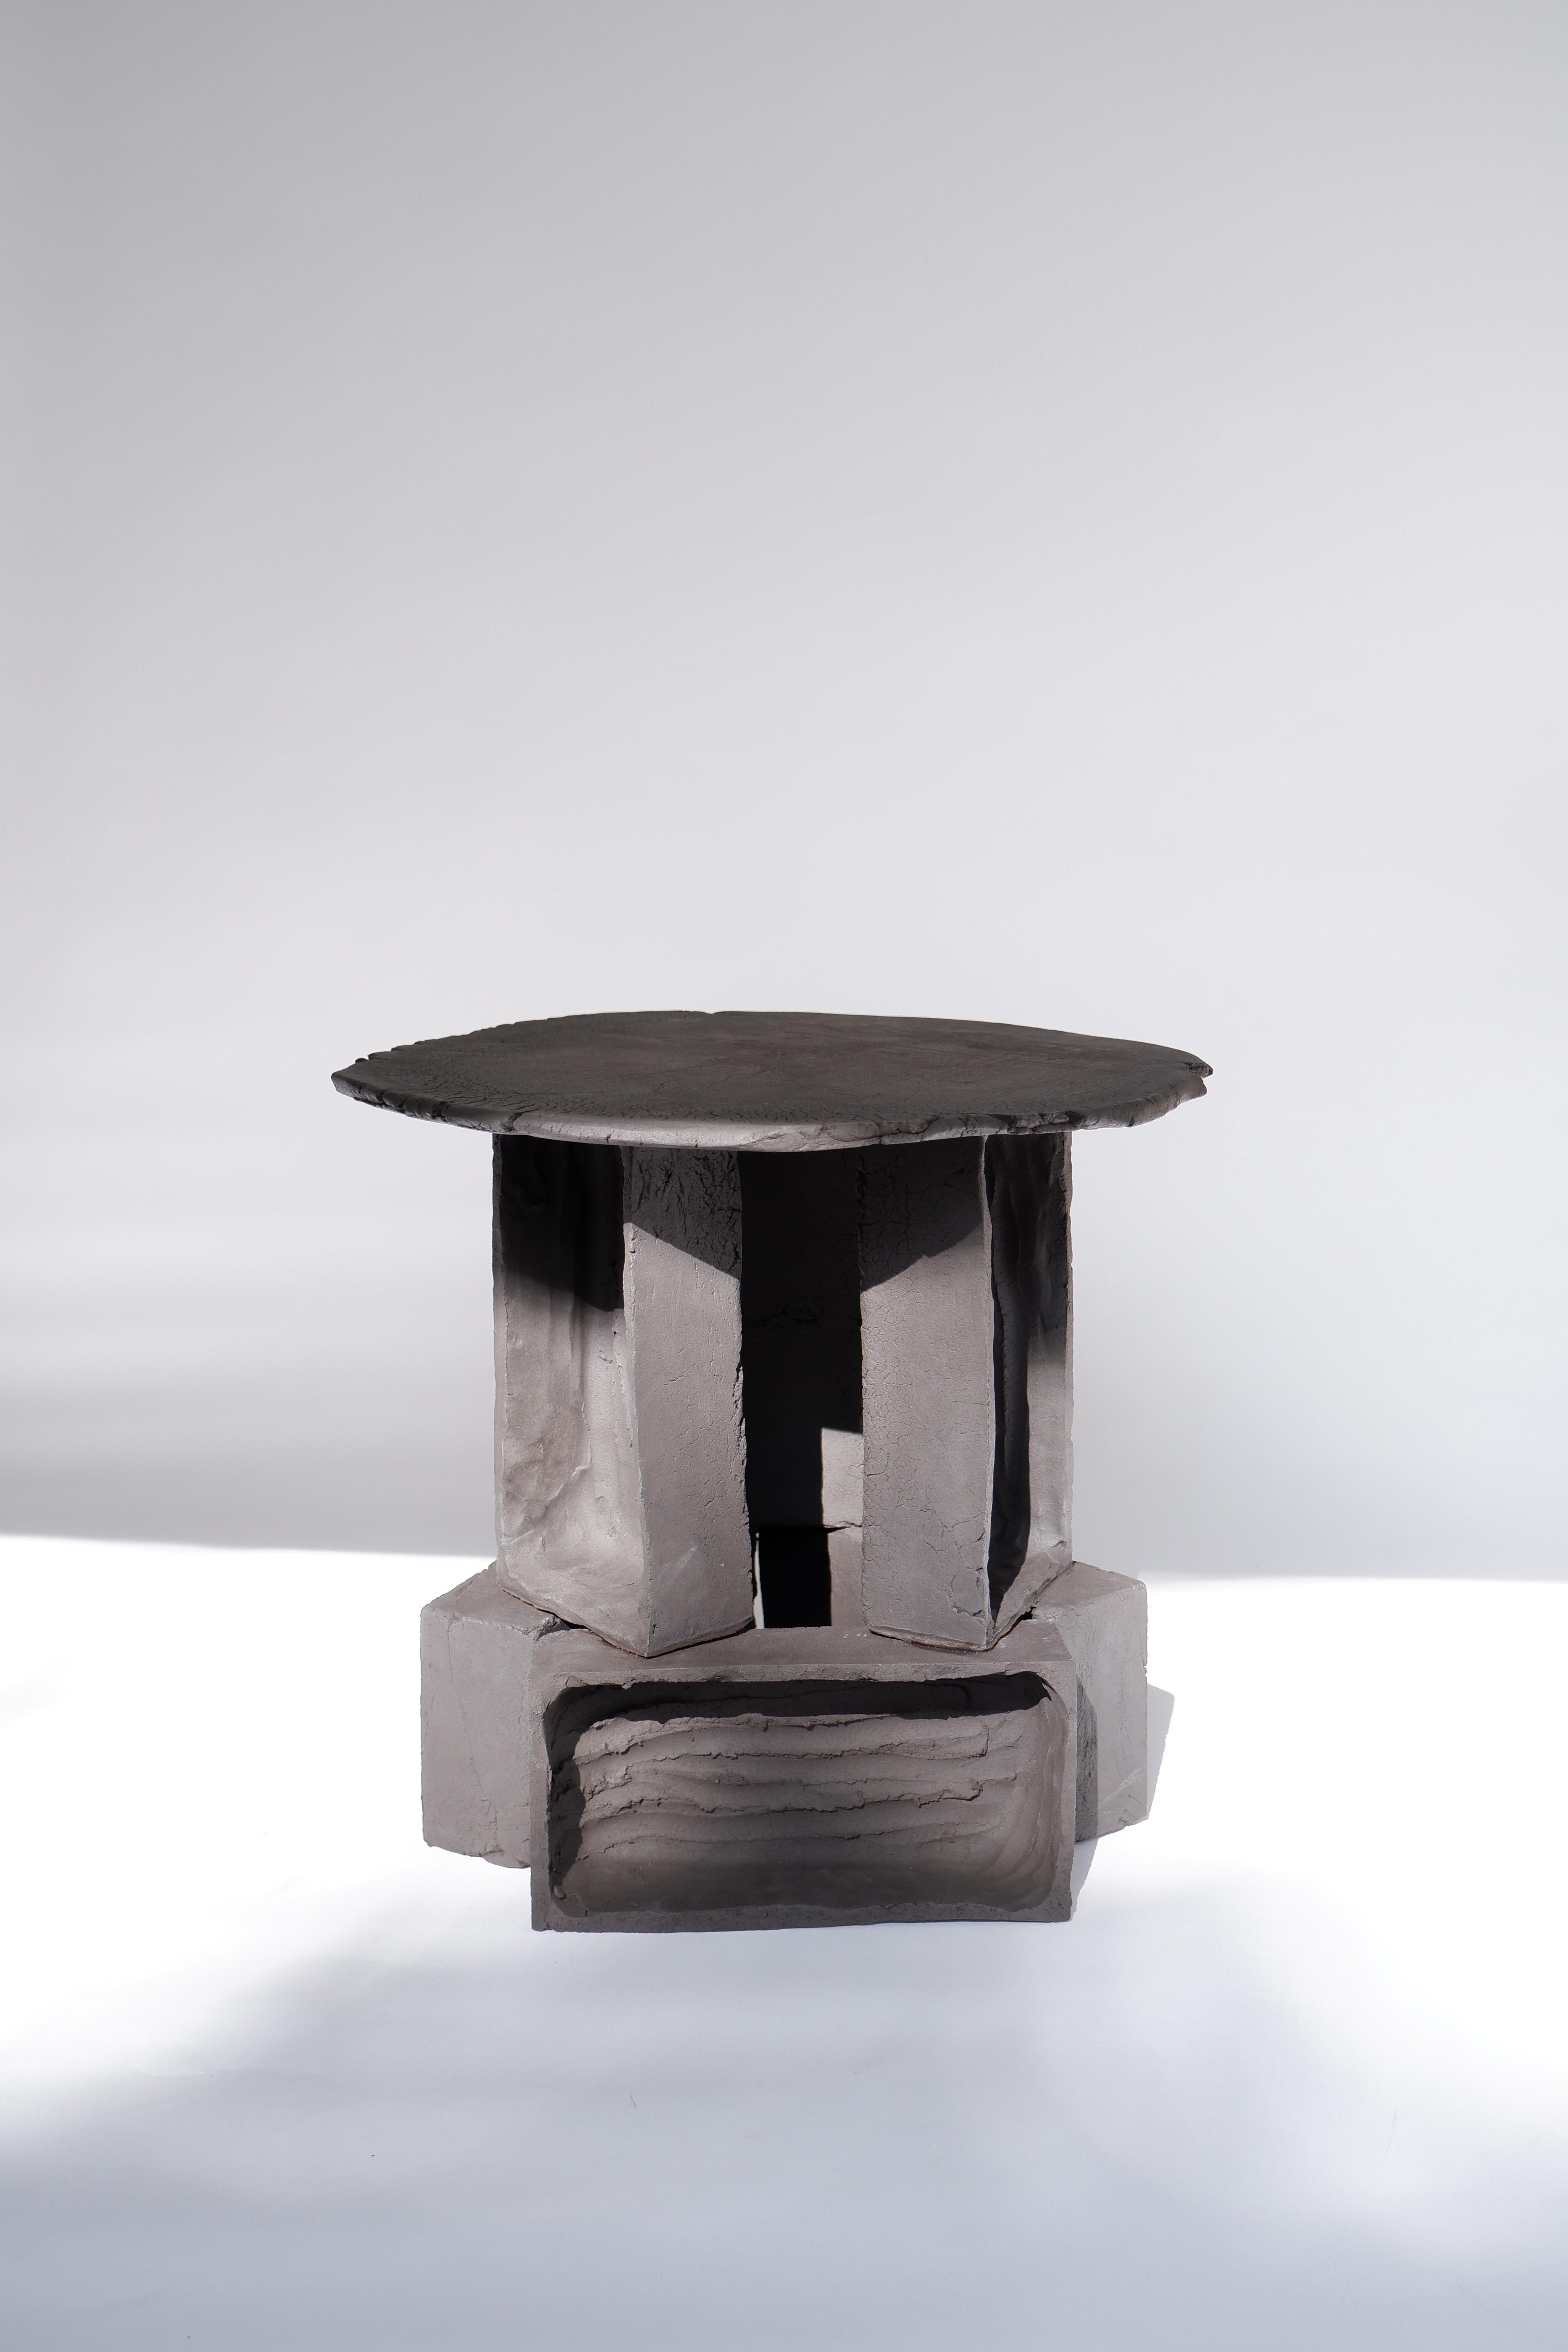 T02 Coffee Table by Ia Kutateladze
One Of  A Kind.
Dimensions: D 38 x H 37 cm.
Materials: Black clay.

Each piece is one of a kind, due to its free hand-building process. The top is always irregular and one of a kind. Possible material variations: